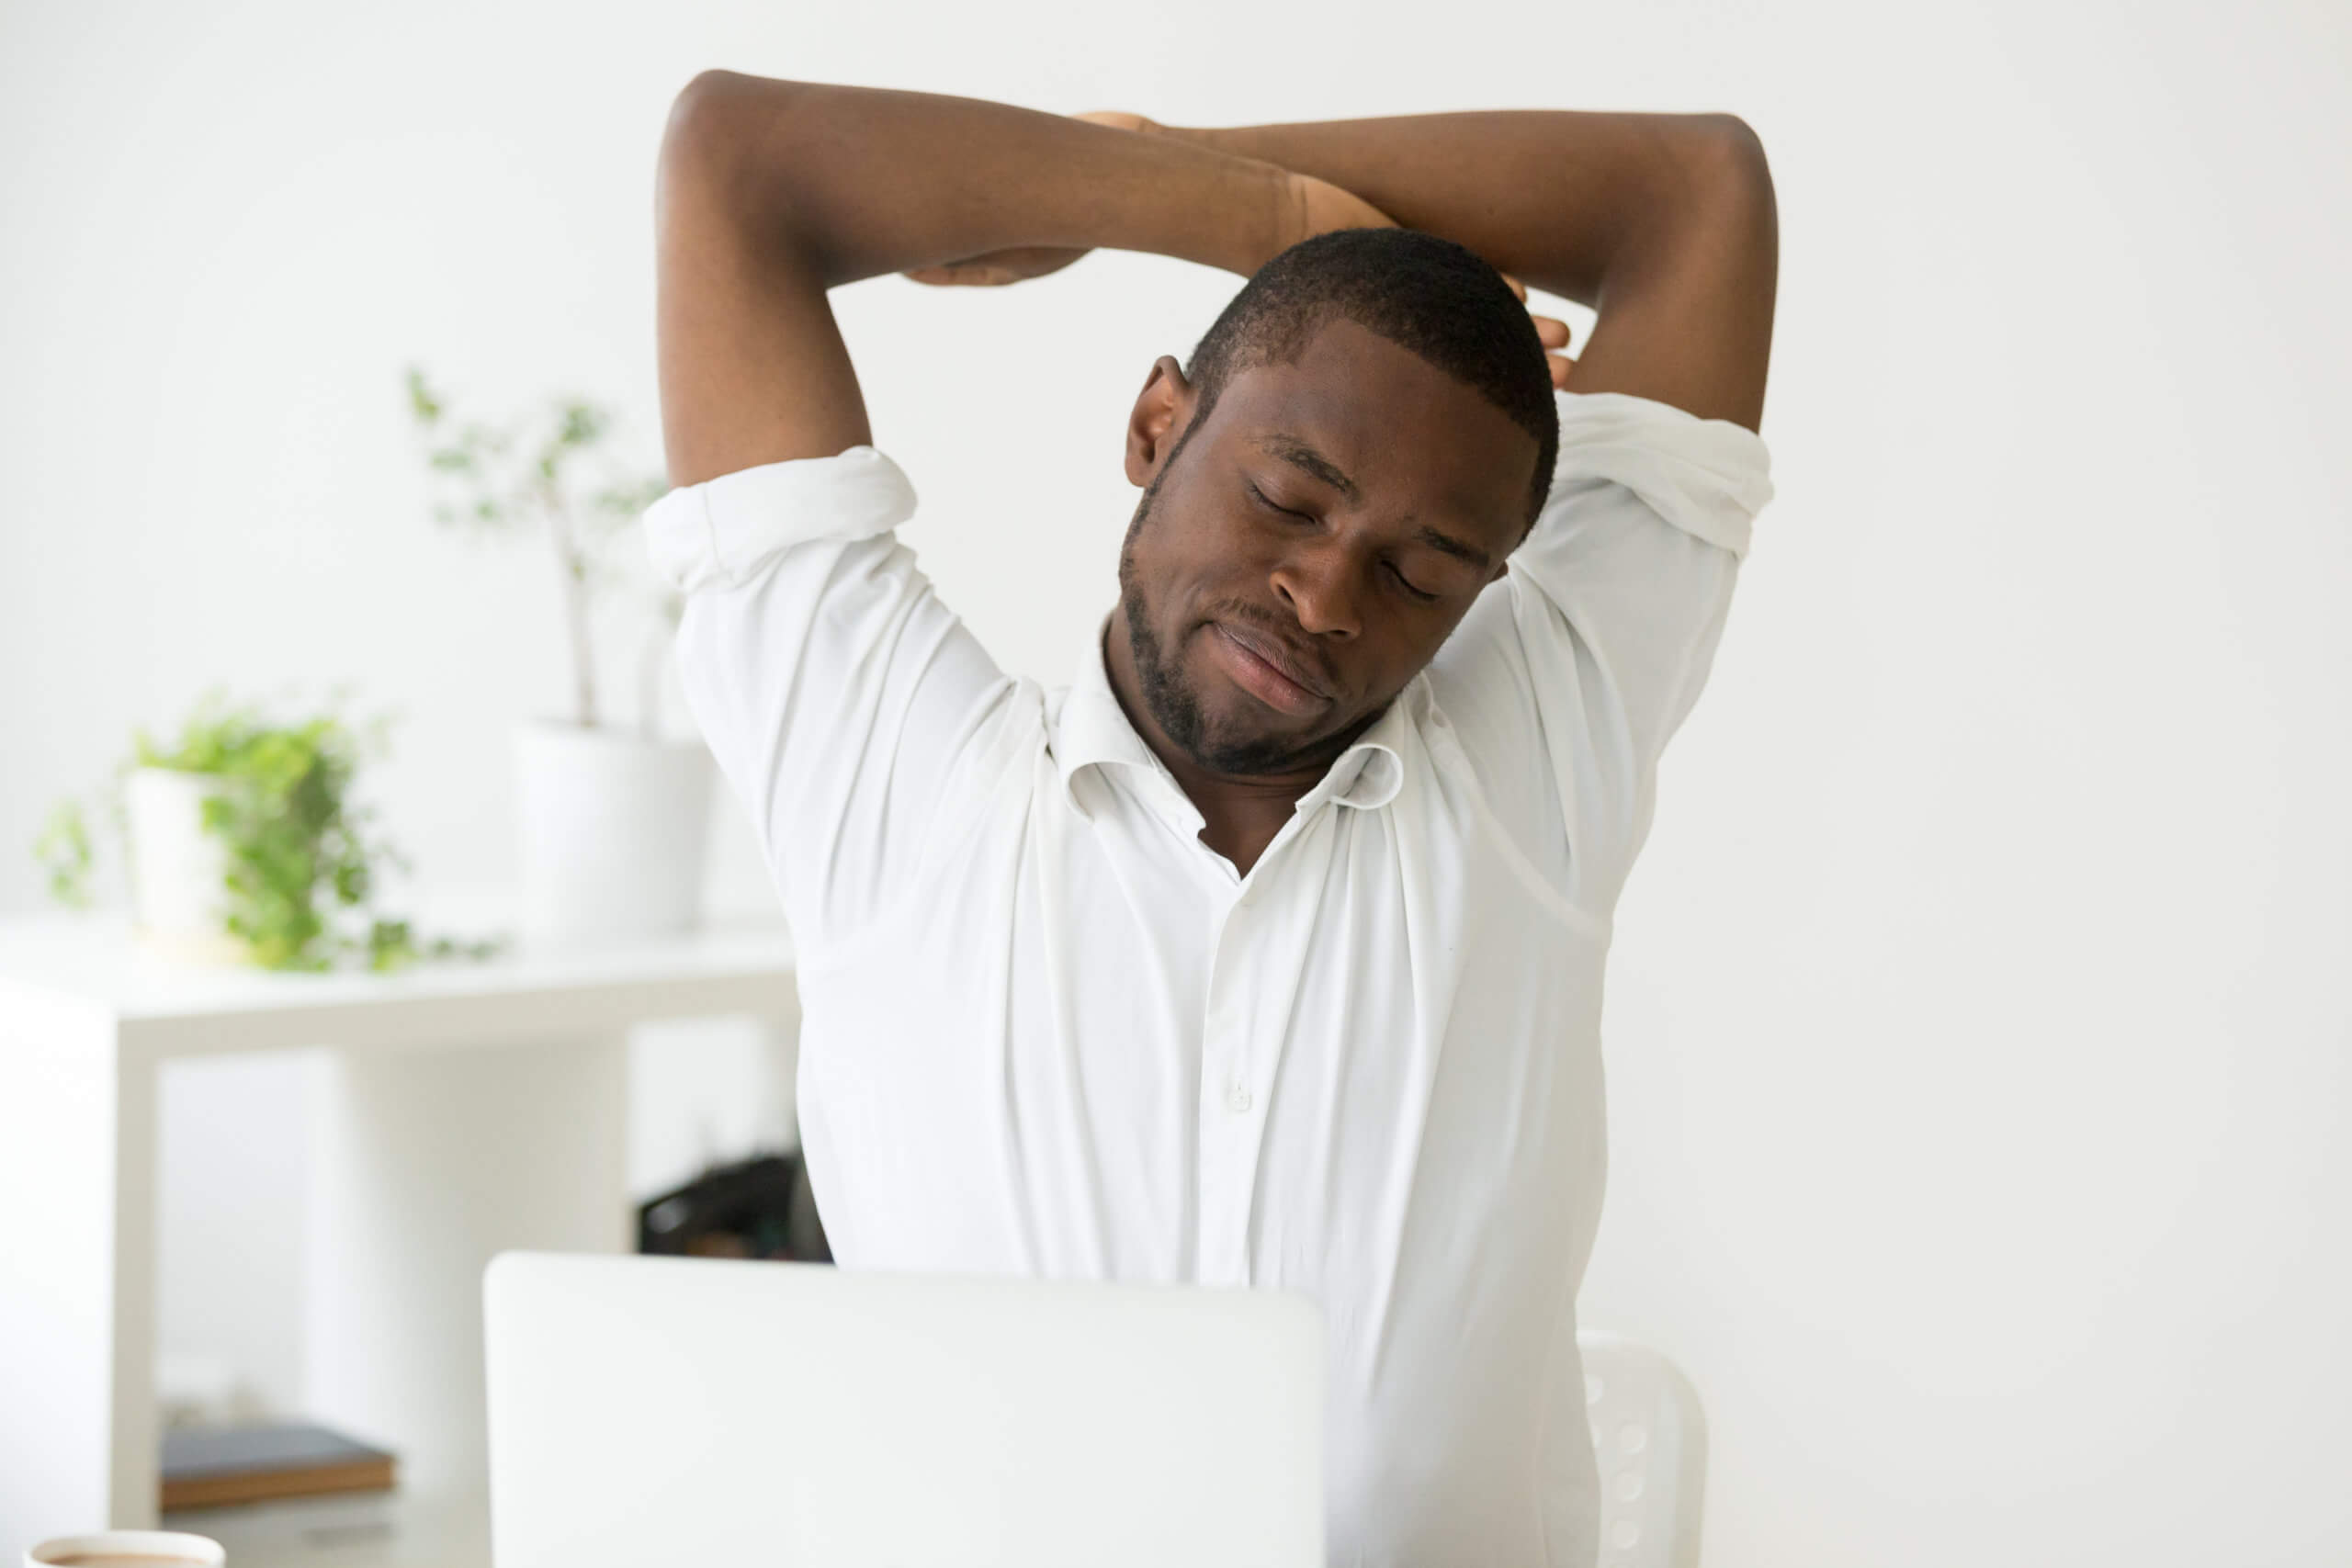 A young Black man stretches his arms while at his desk to relieve upper body pain.